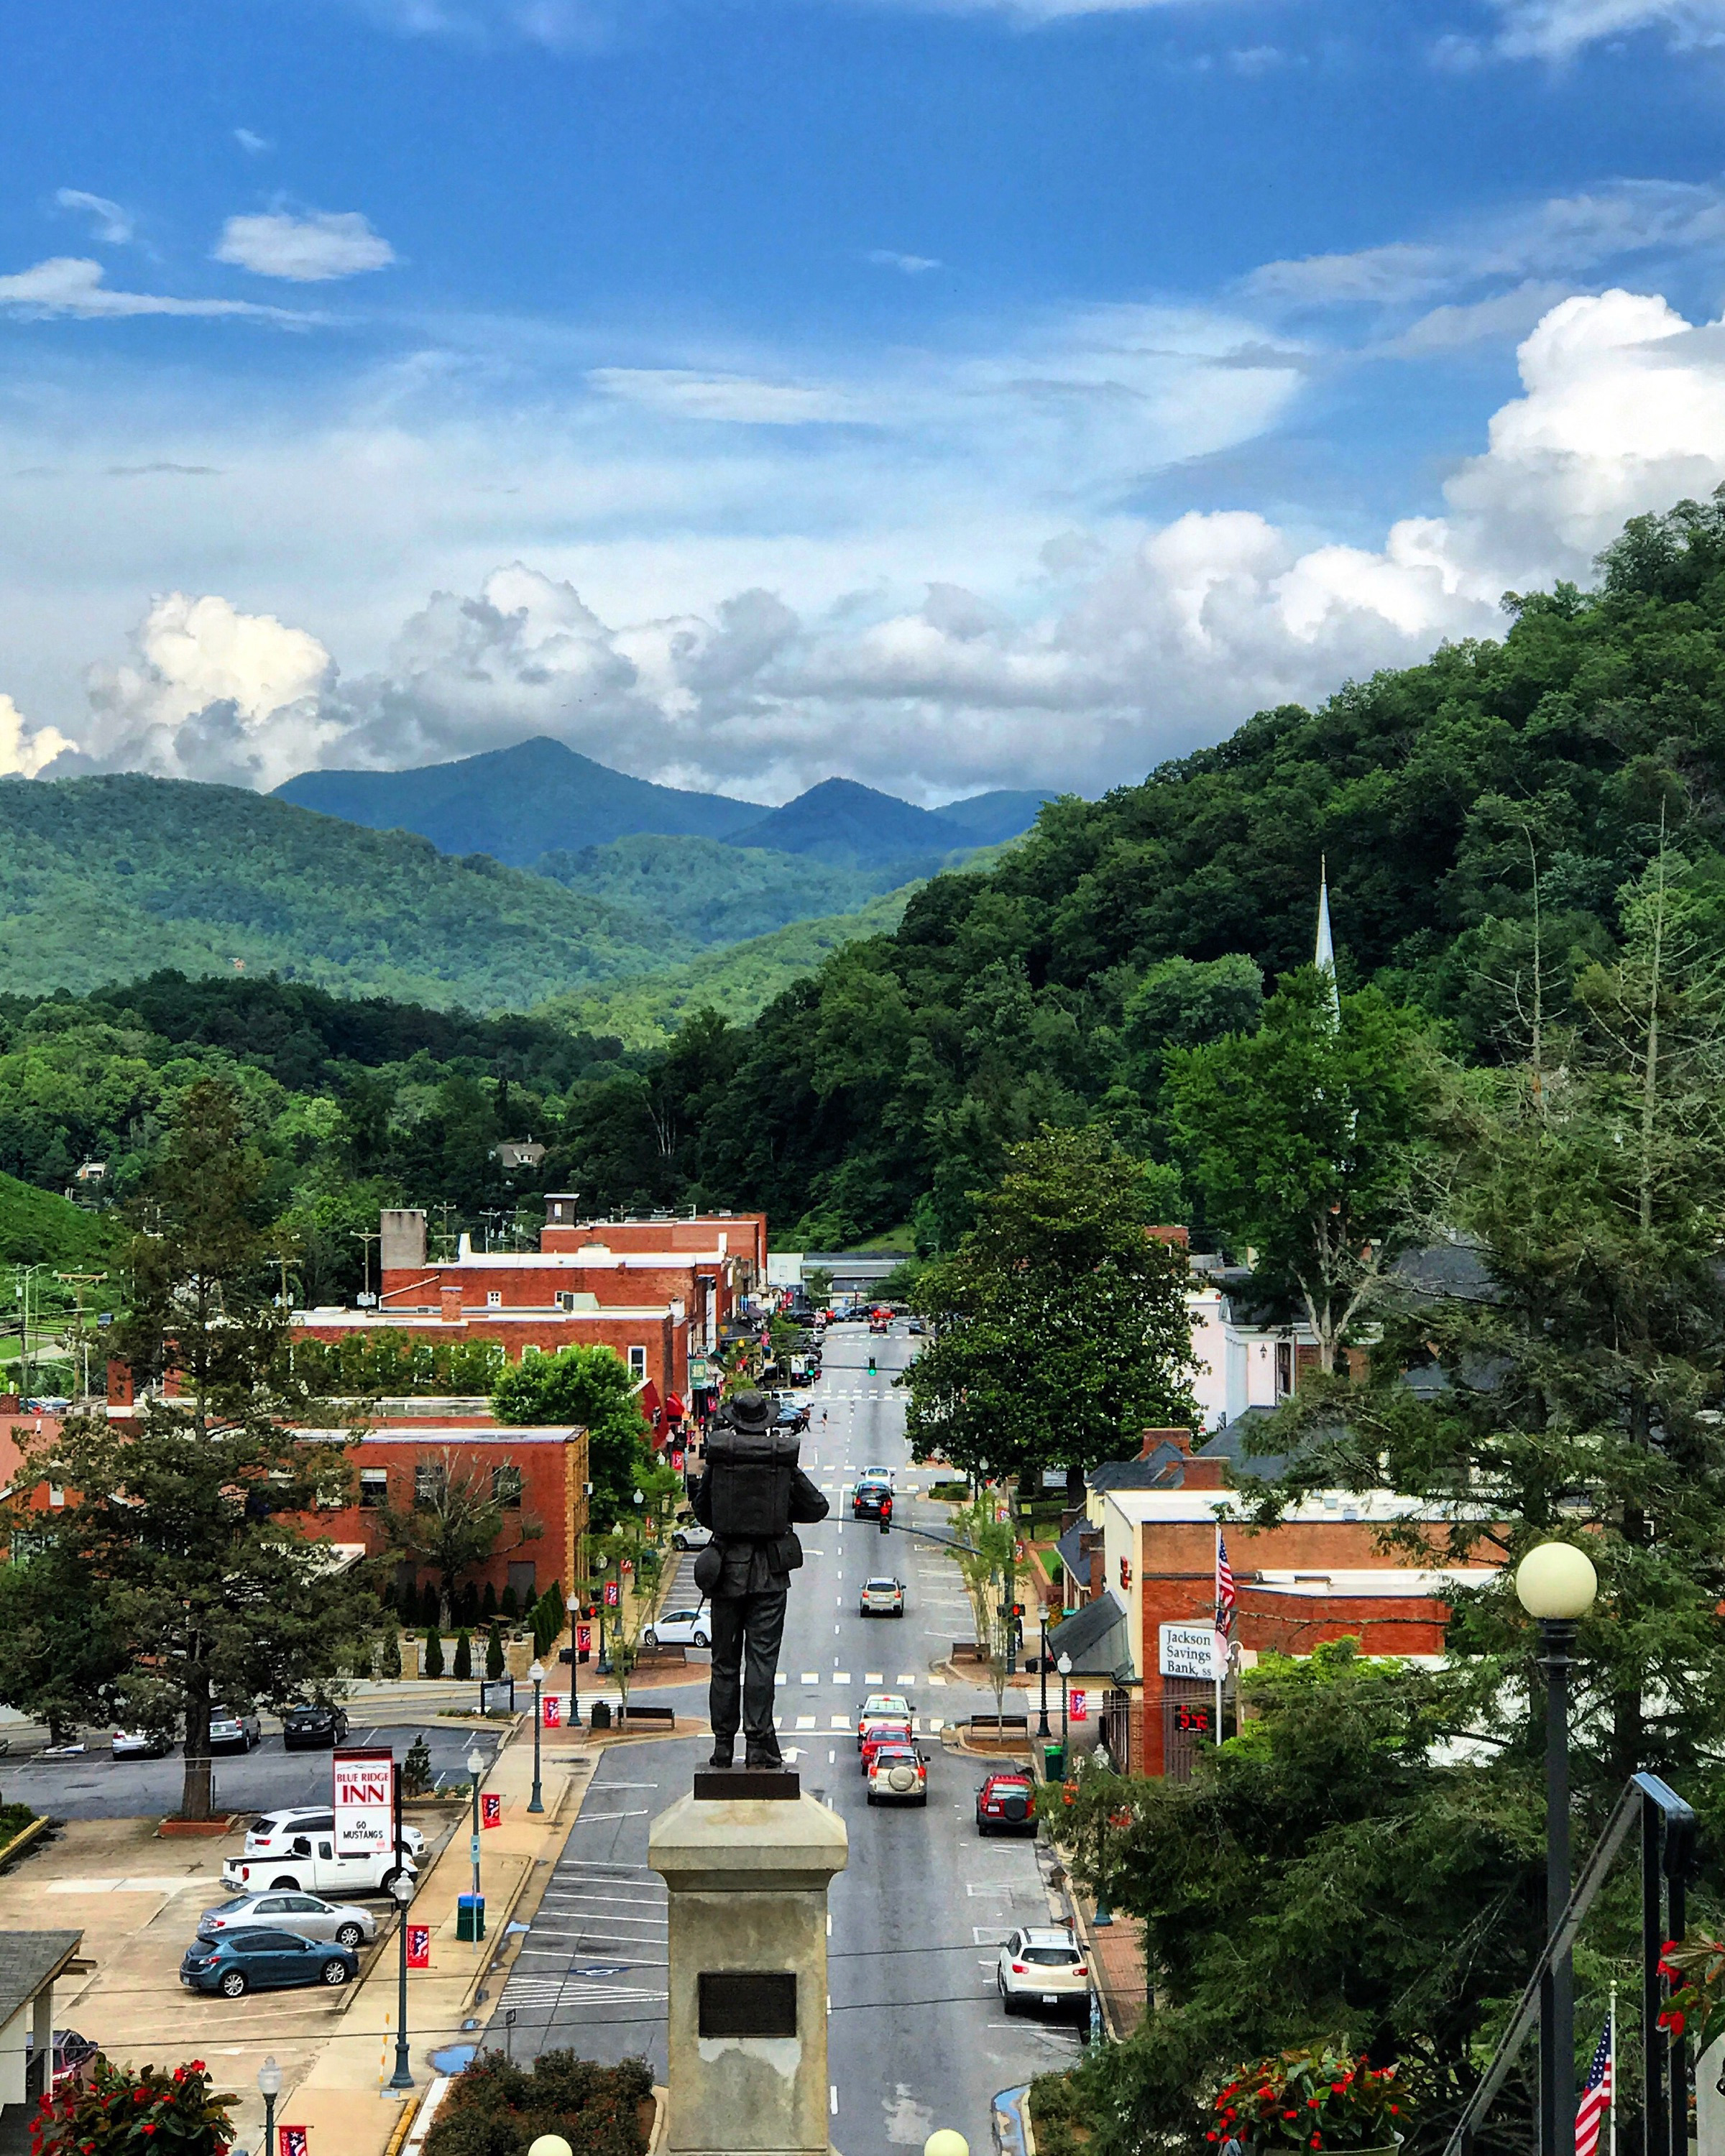 Sylva A Cool Mountain Town You Might picture